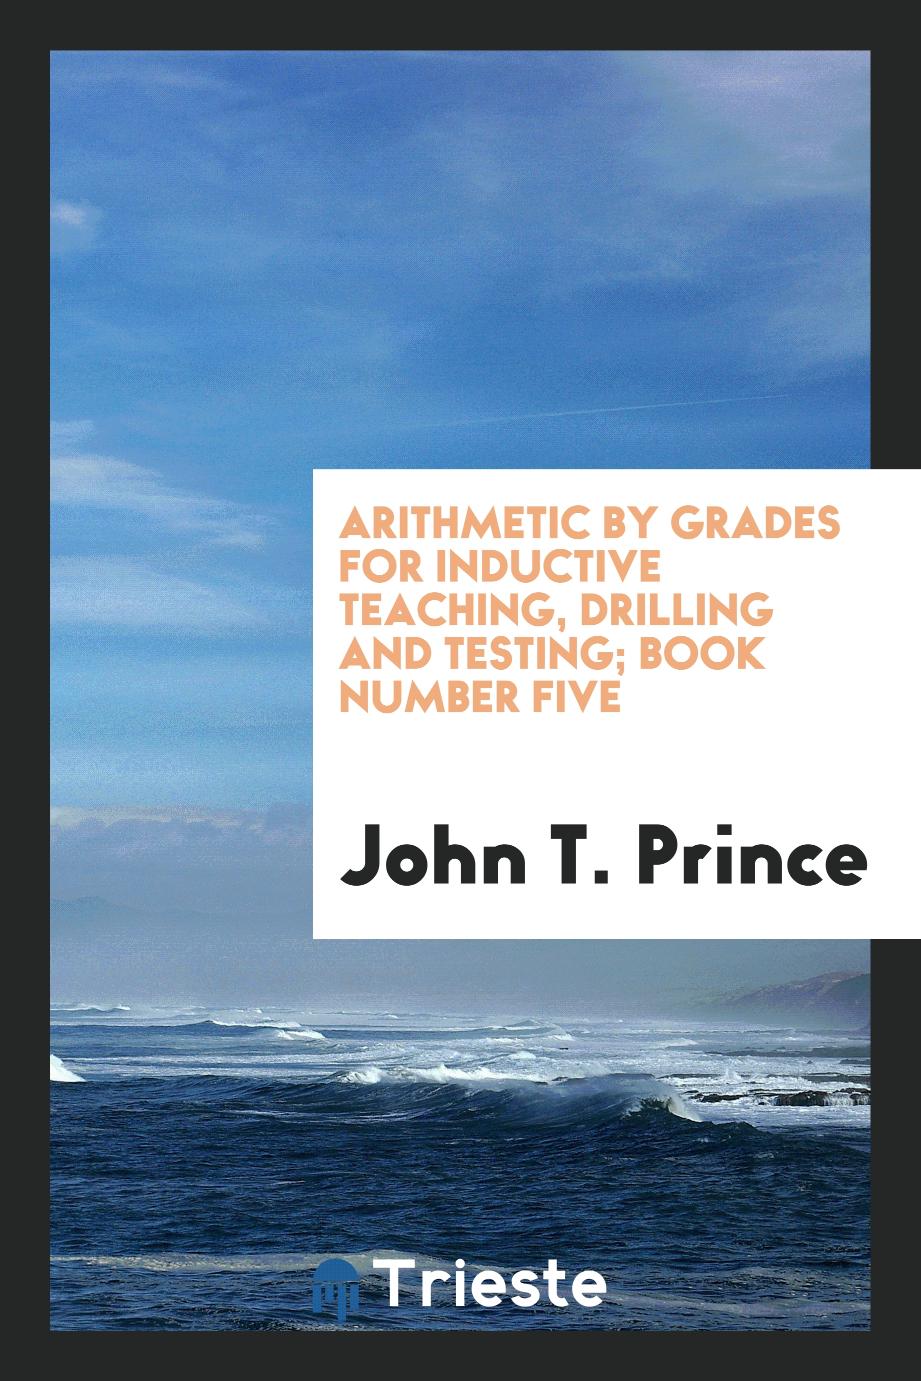 Arithmetic by Grades for Inductive Teaching, Drilling and Testing; Book Number Five